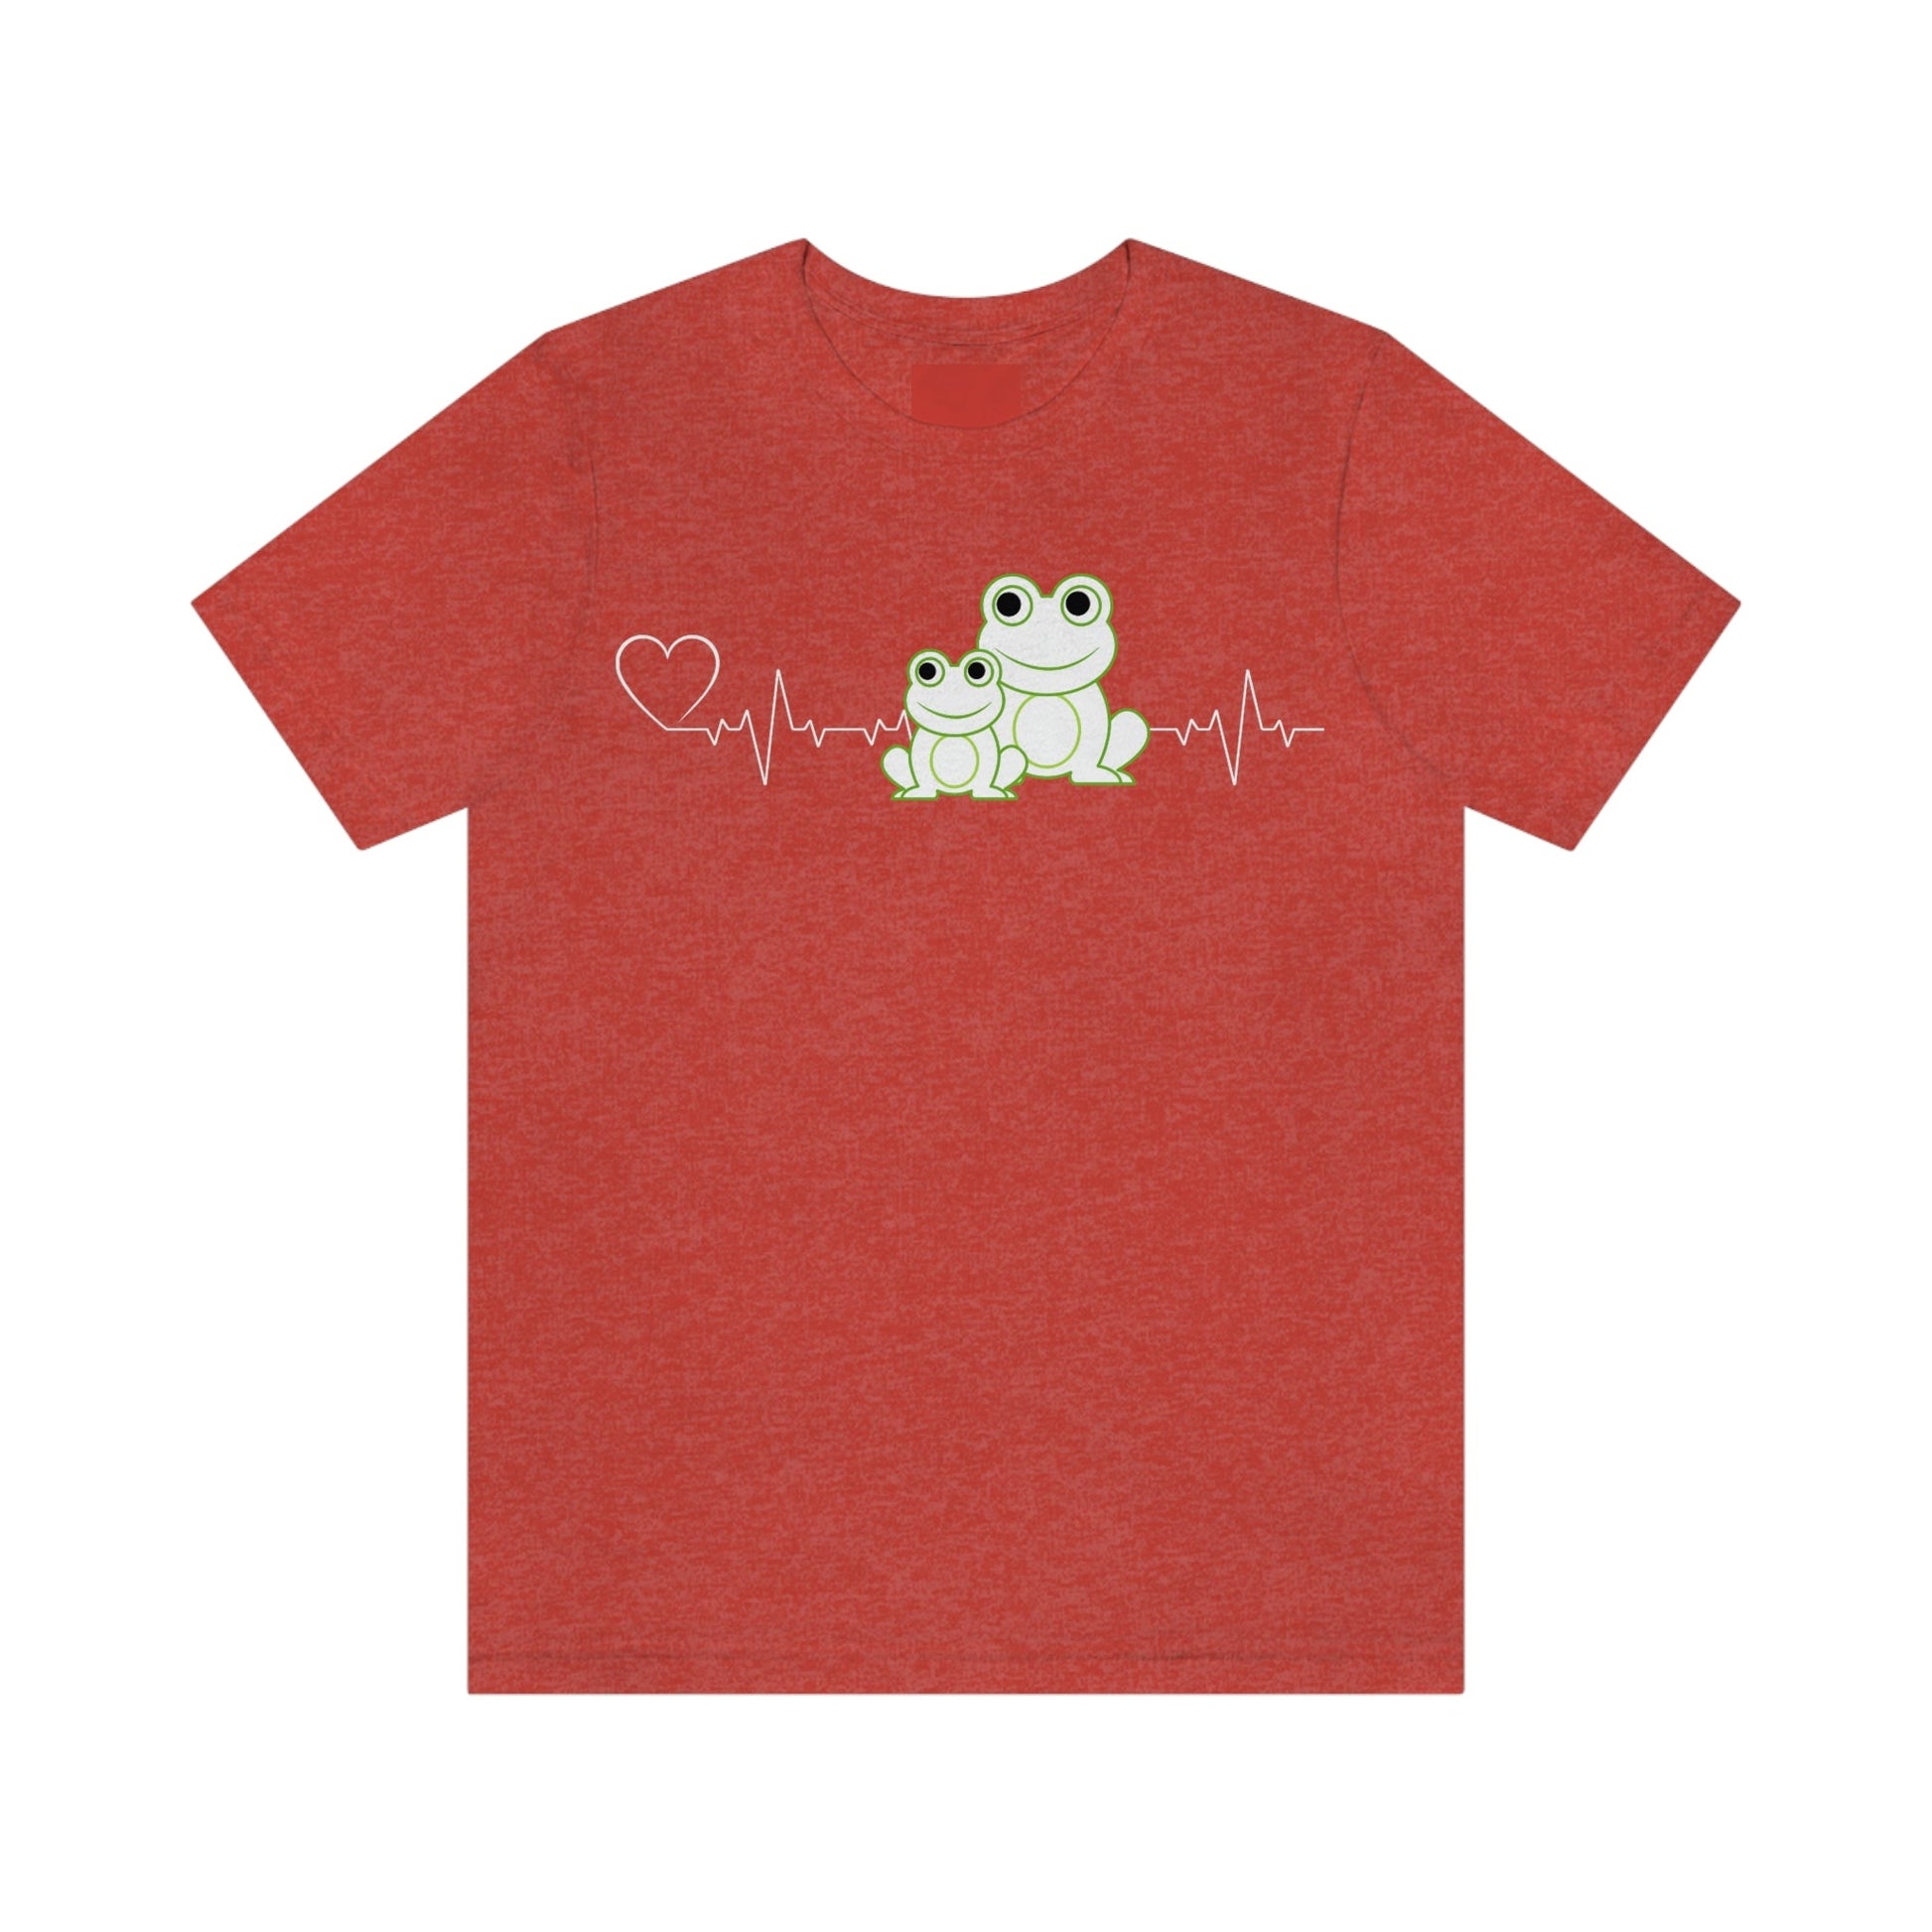 Heartbeat Mom & Baby Frogs Graphic T-Shirt-T-Shirt-Heather Red-S-mysticalcherry